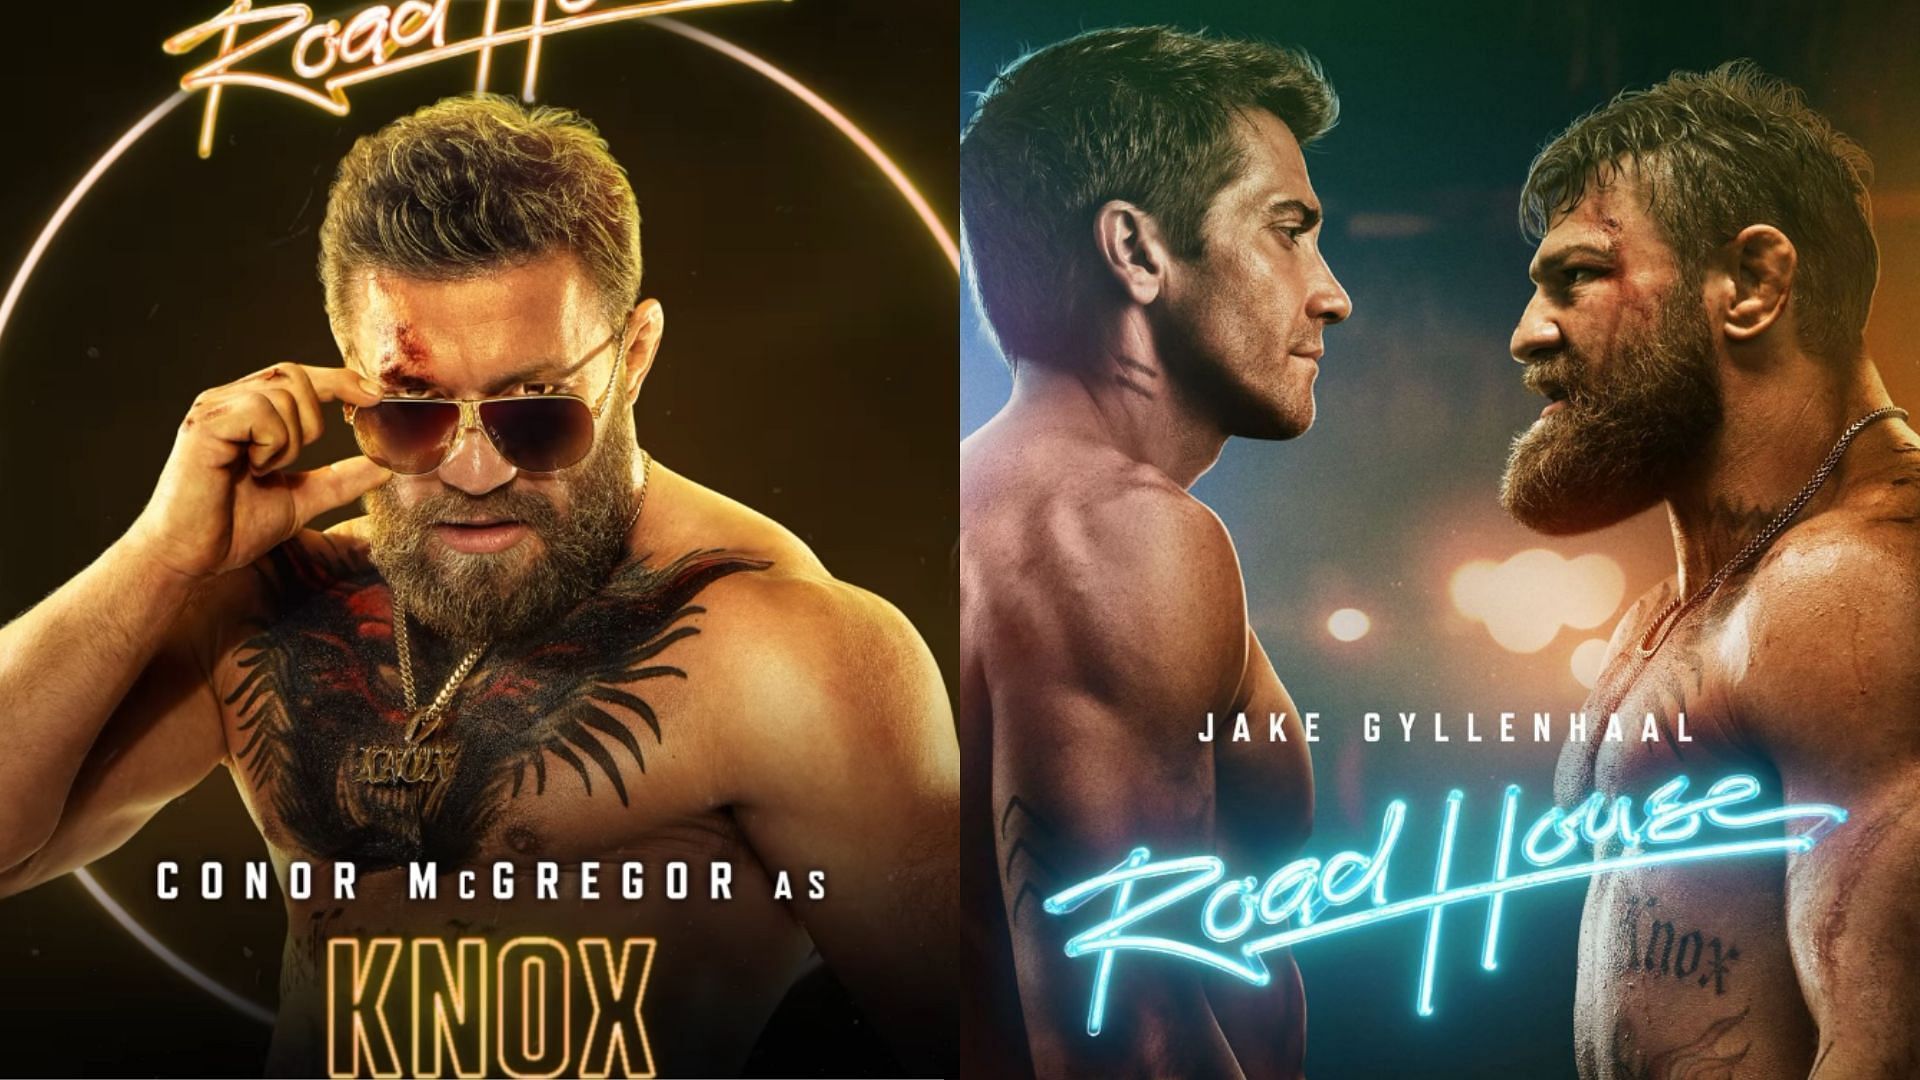 Conor McGregor (left) reacts to Road House behind-the-scenes photographs [Images courtesy of @thenotoriousmma on Instagram]